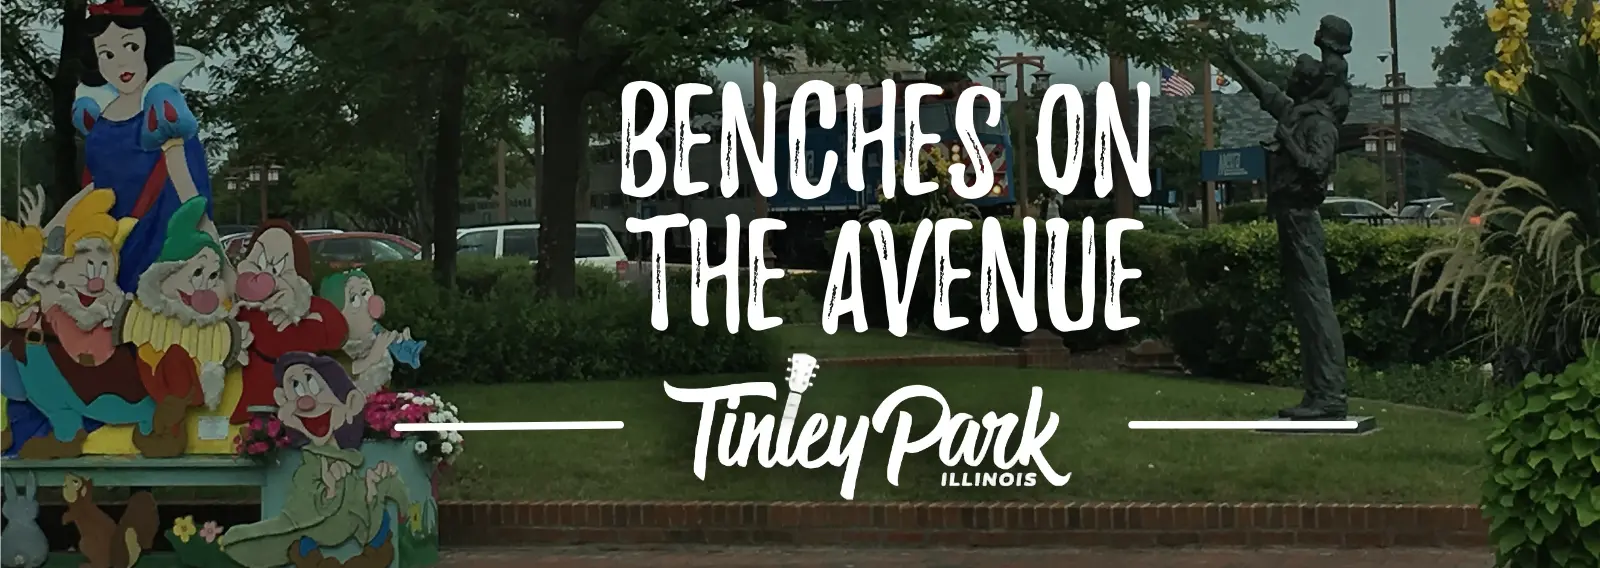 About Tinley Park Benches On The Avenue – Things To Do In Tinley Park